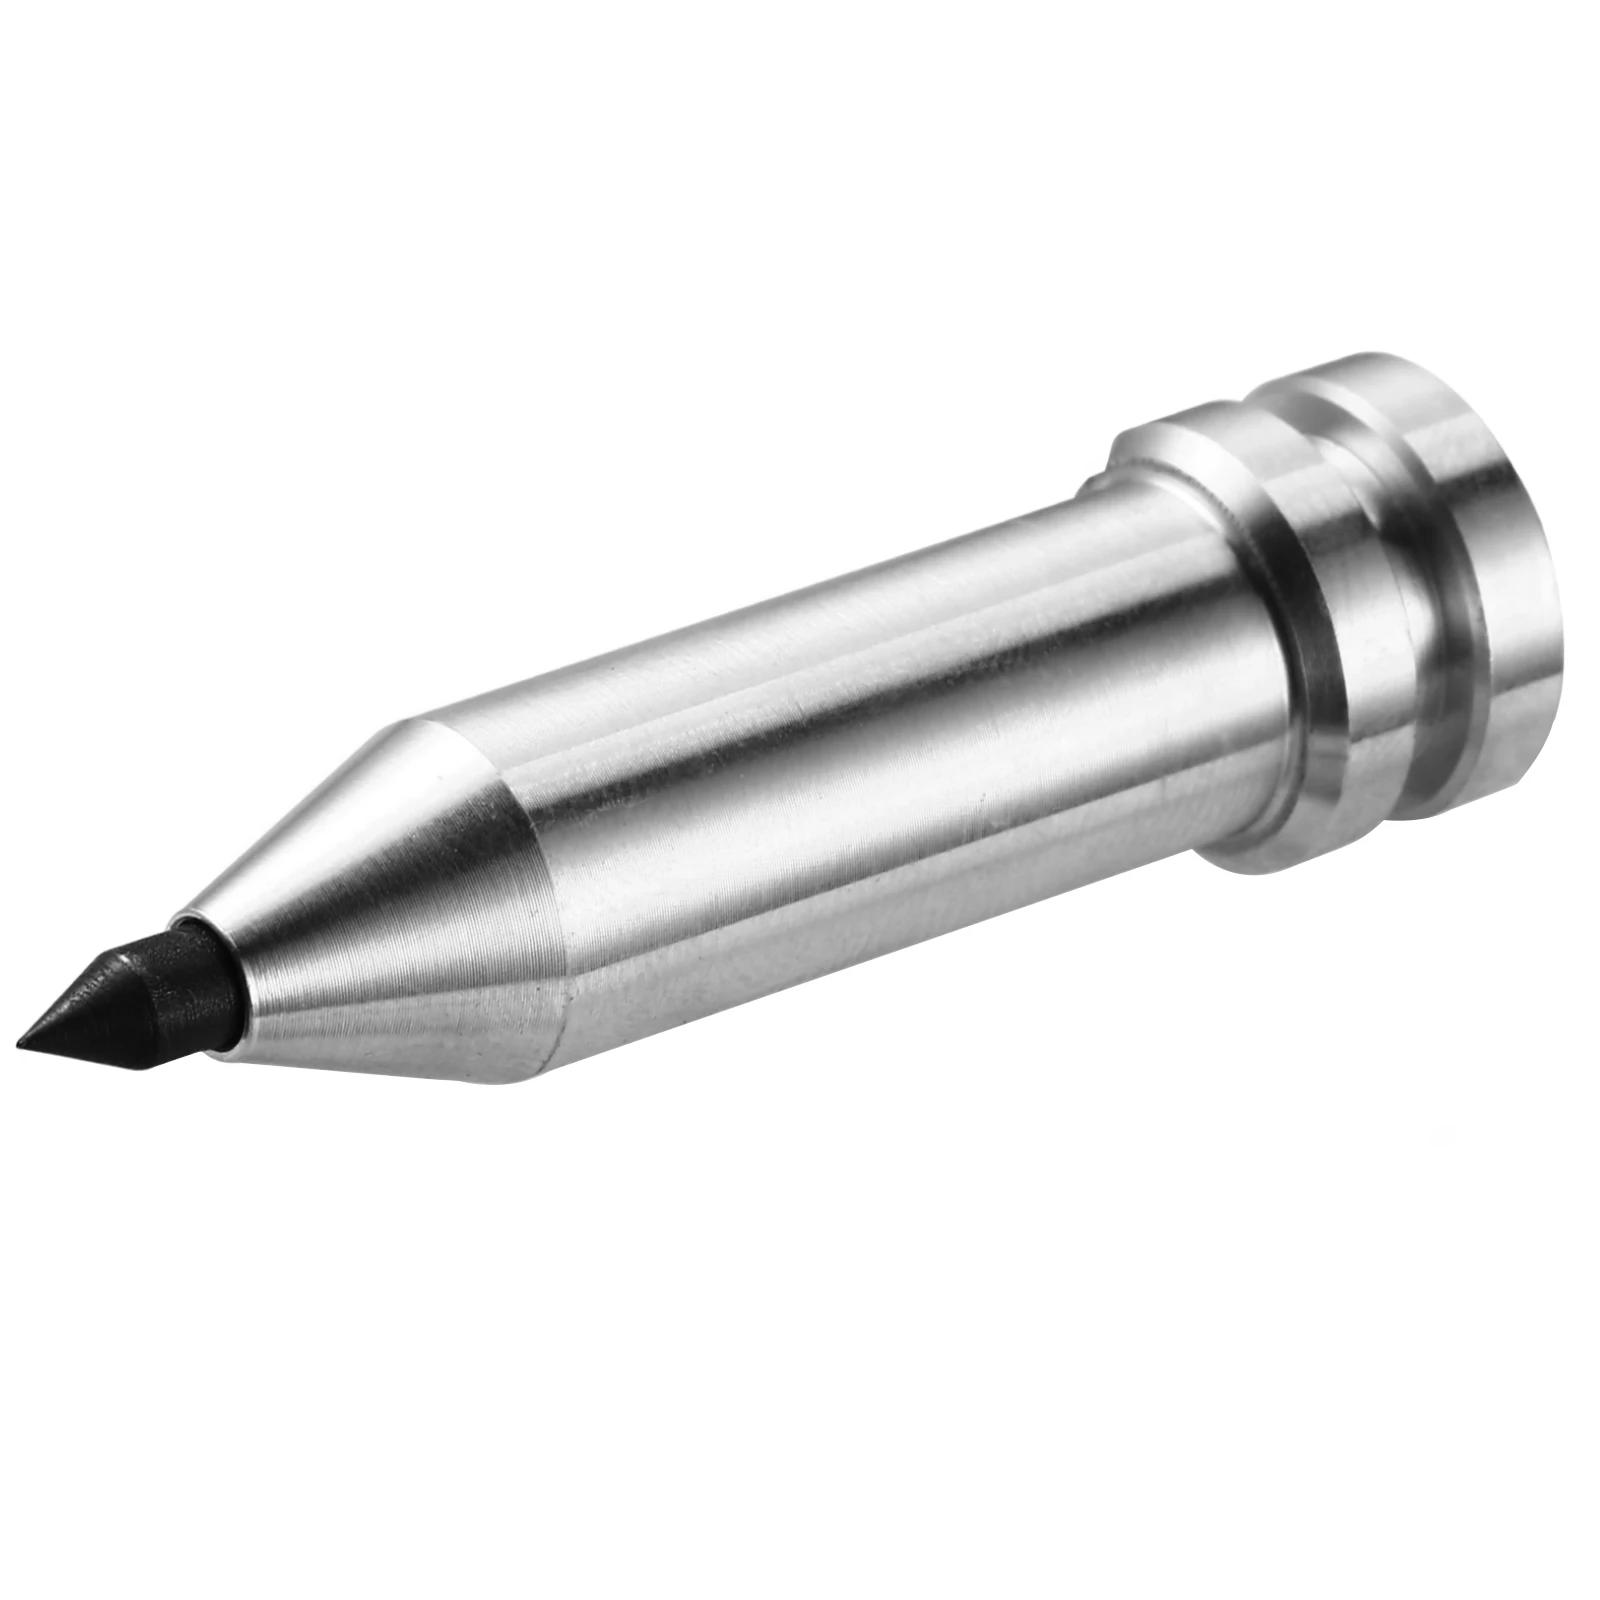 Etching/Engraving Precision Tip Tool For Maker And Explore - $277.67